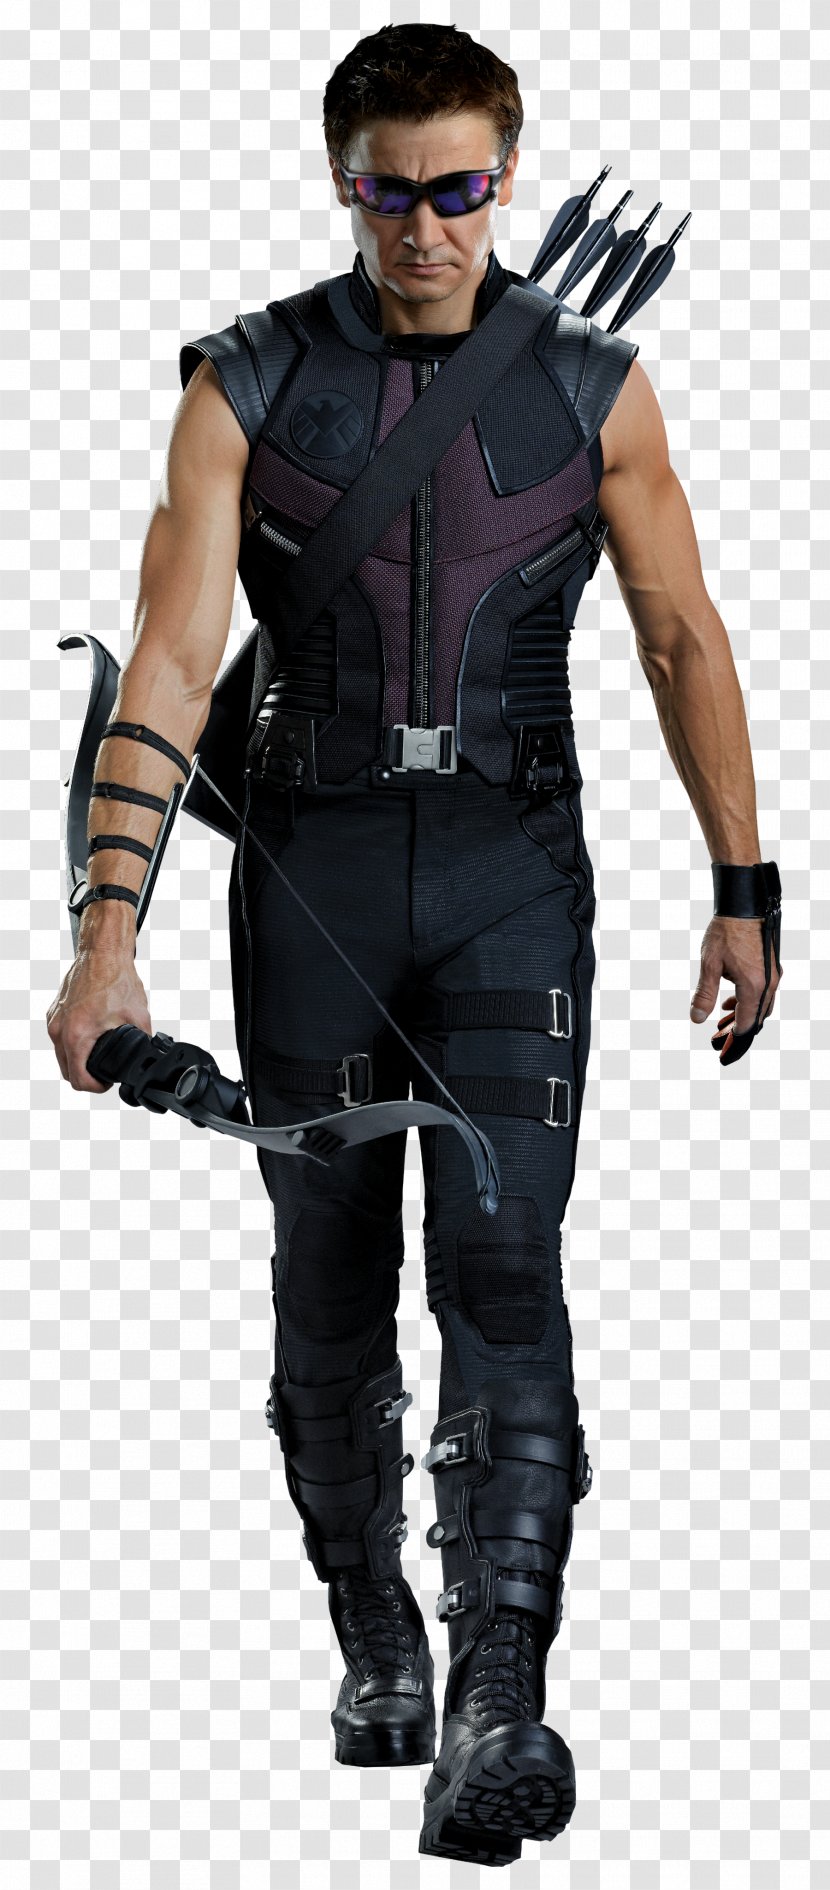 Clint Barton Wanda Maximoff Quicksilver Captain America Black Panther - Avengers Age Of Ultron - STAR DUST Transparent PNG